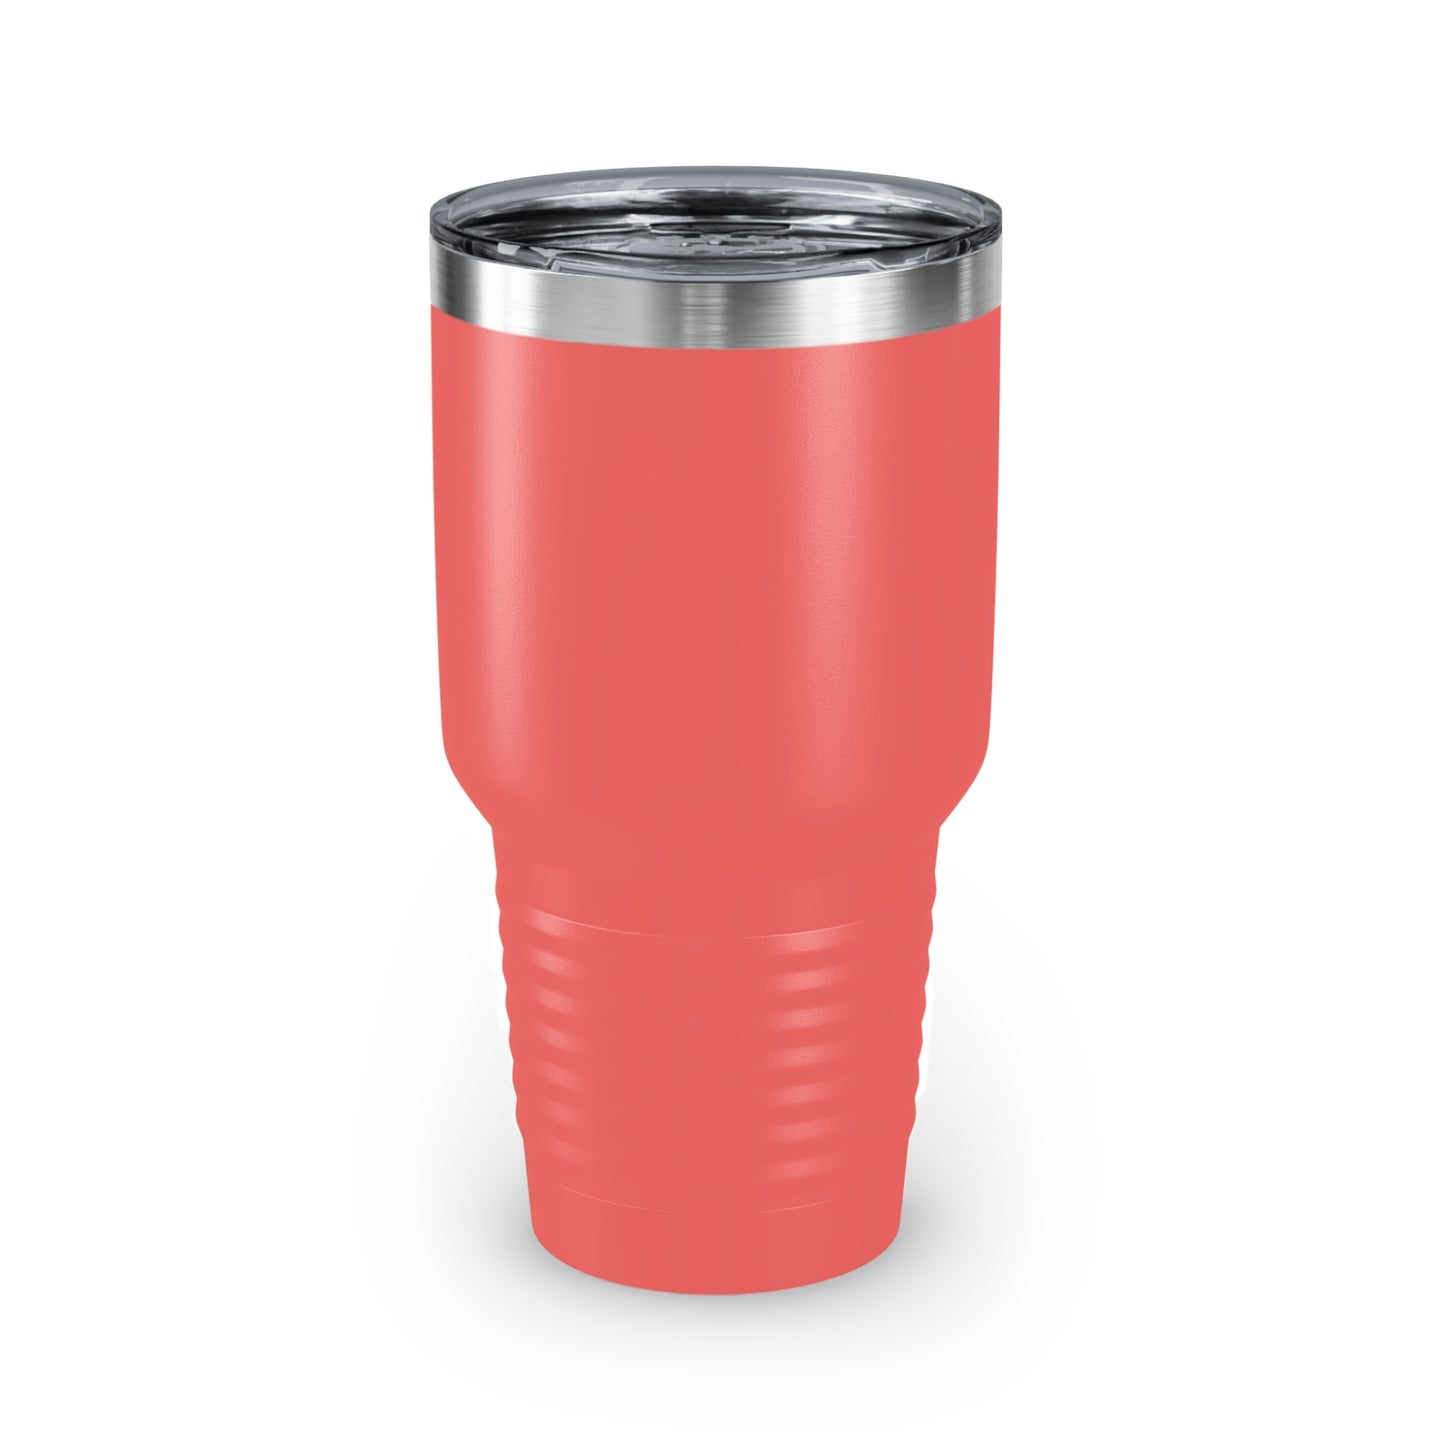 She Reads To Fill Her Shattered Heart Ringneck Tumbler, 30oz